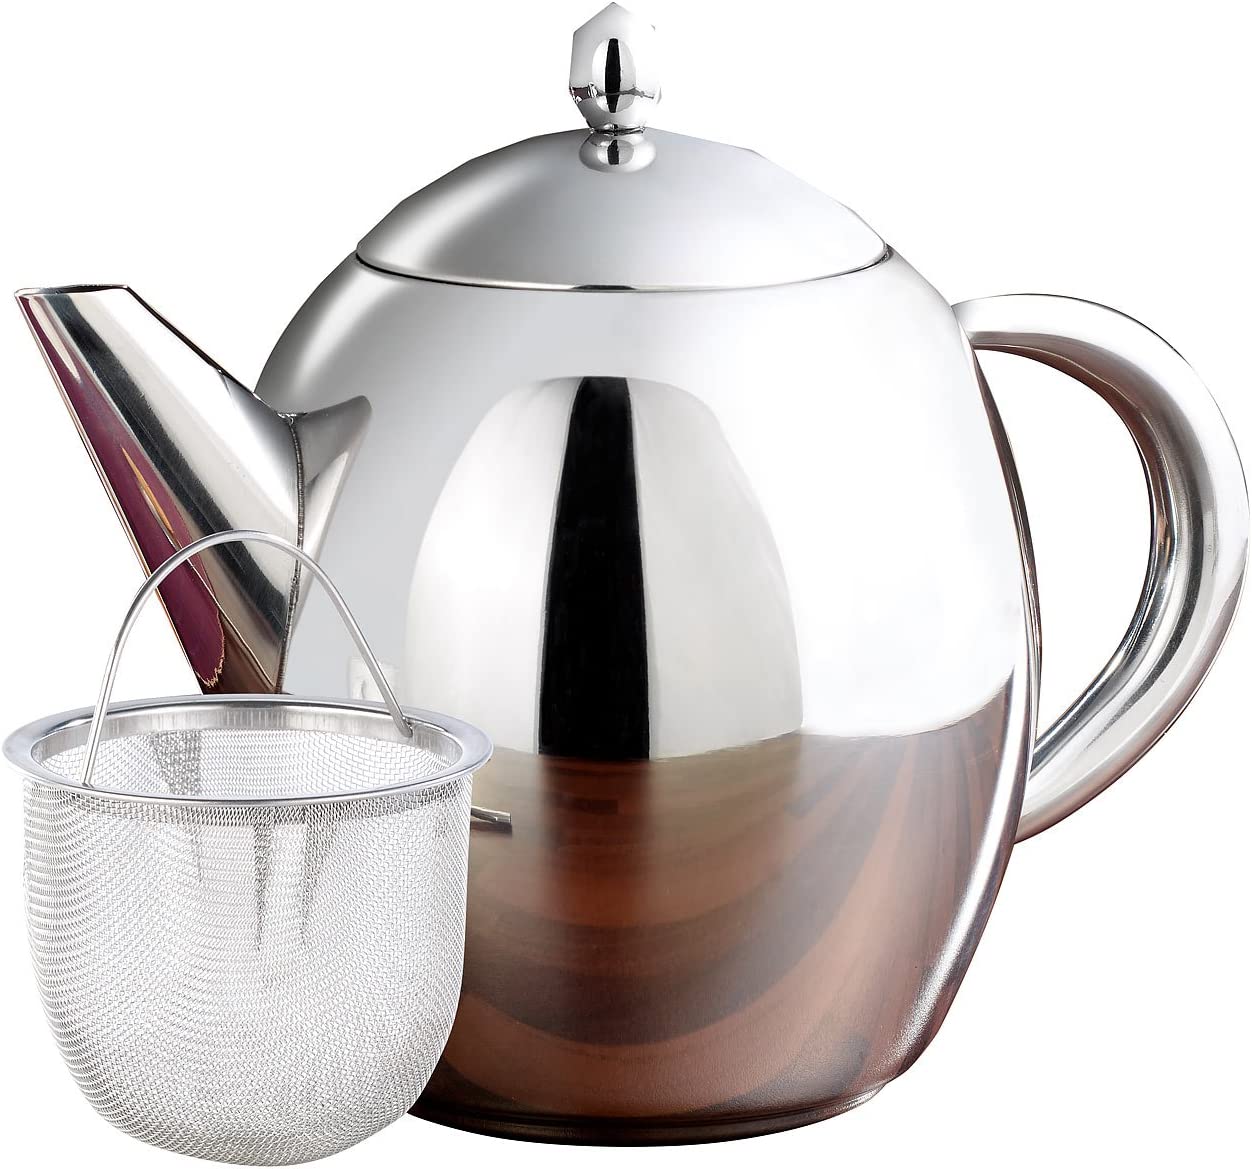 Rosenstein & Sons Teapot with Strainer: Stainless Steel Teapot with Strainer Insert, 0.5 Litre, Dishwasher Safe (Teapot with Stainless Steel)